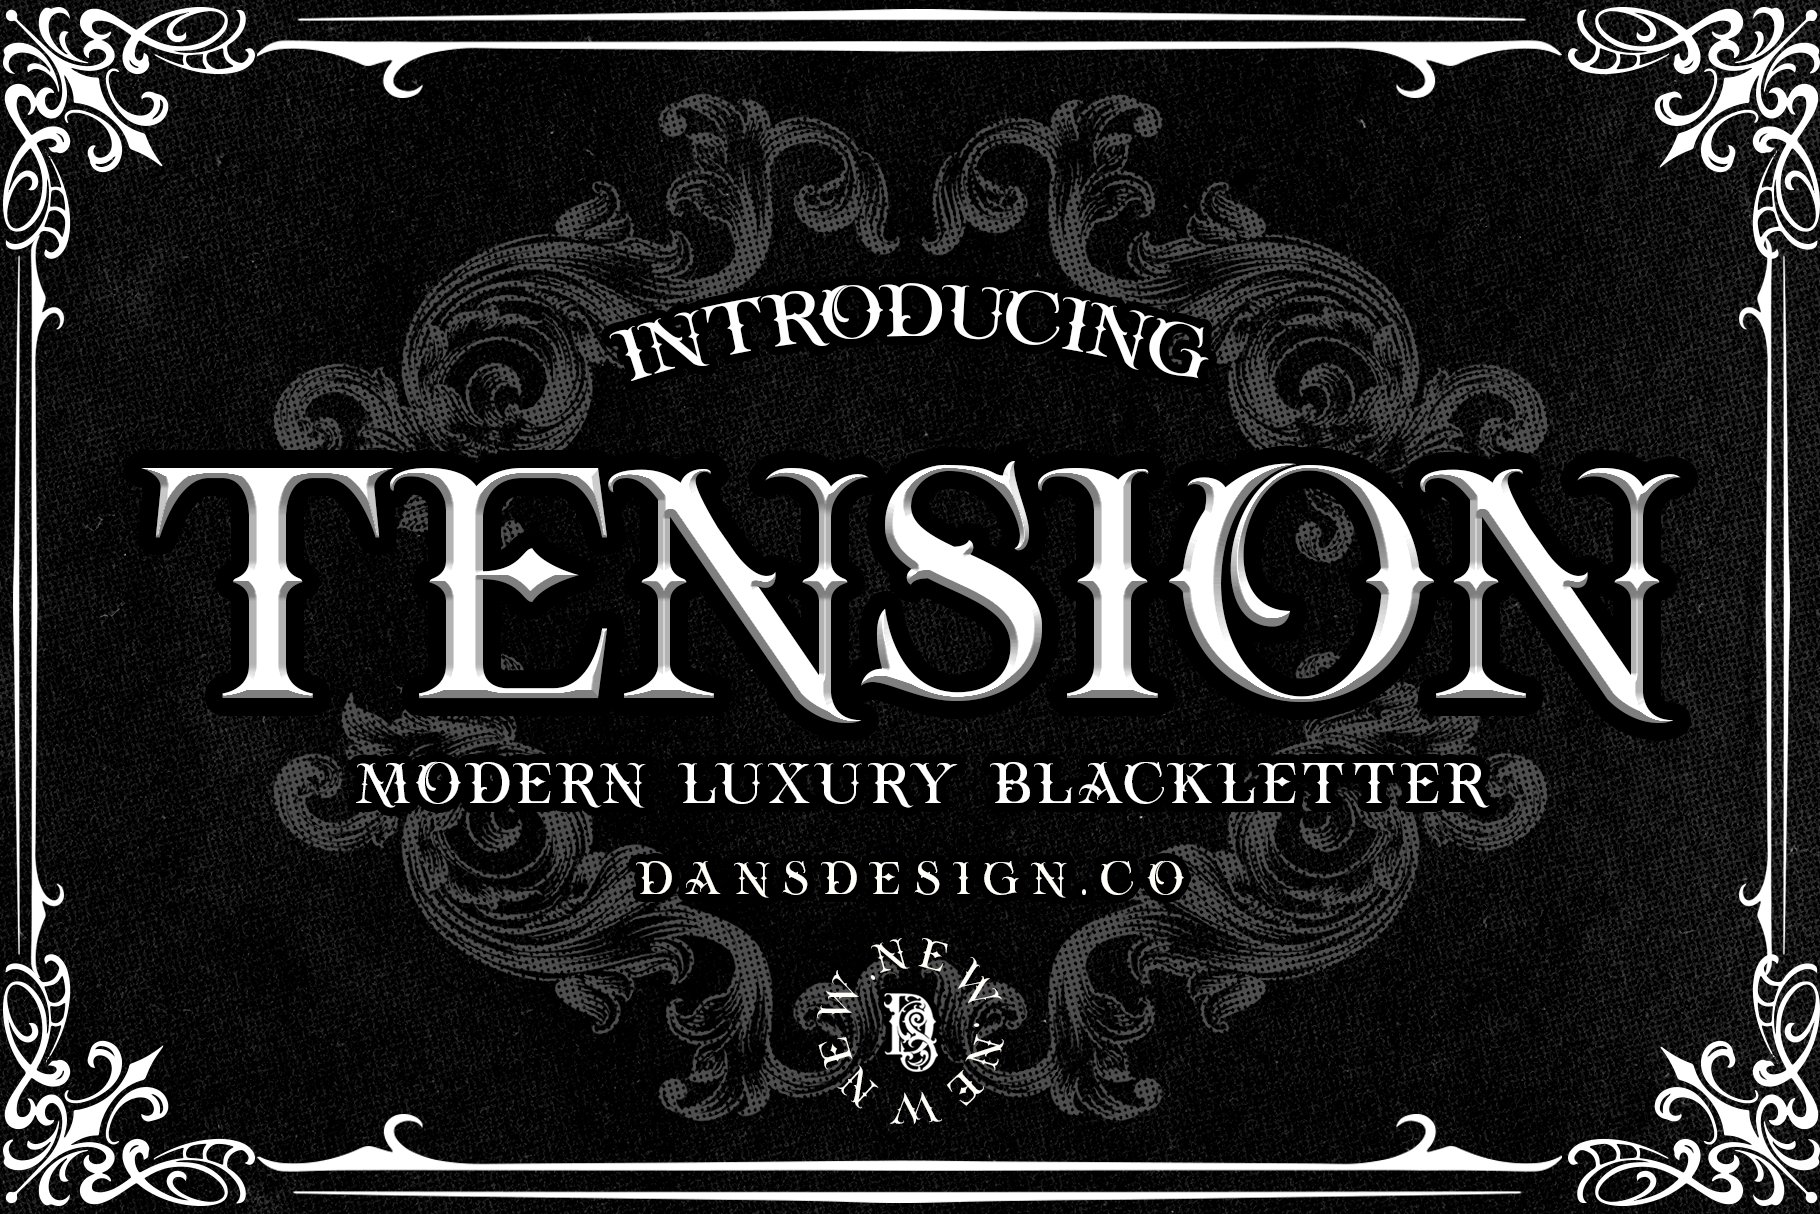 TENSION cover image.